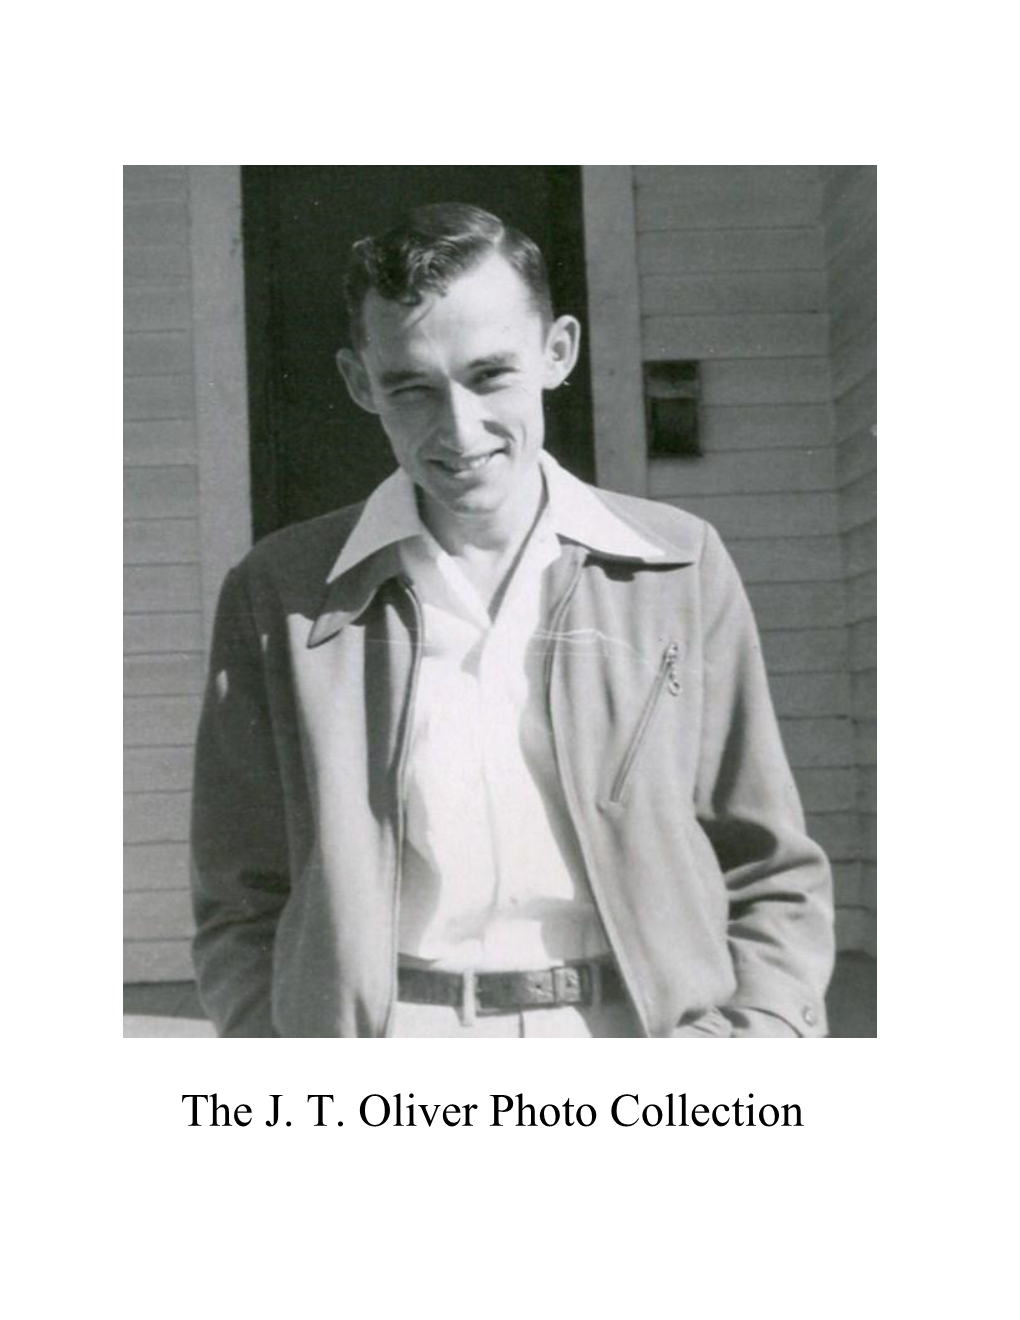 The J. T. Oliver Photo Collection